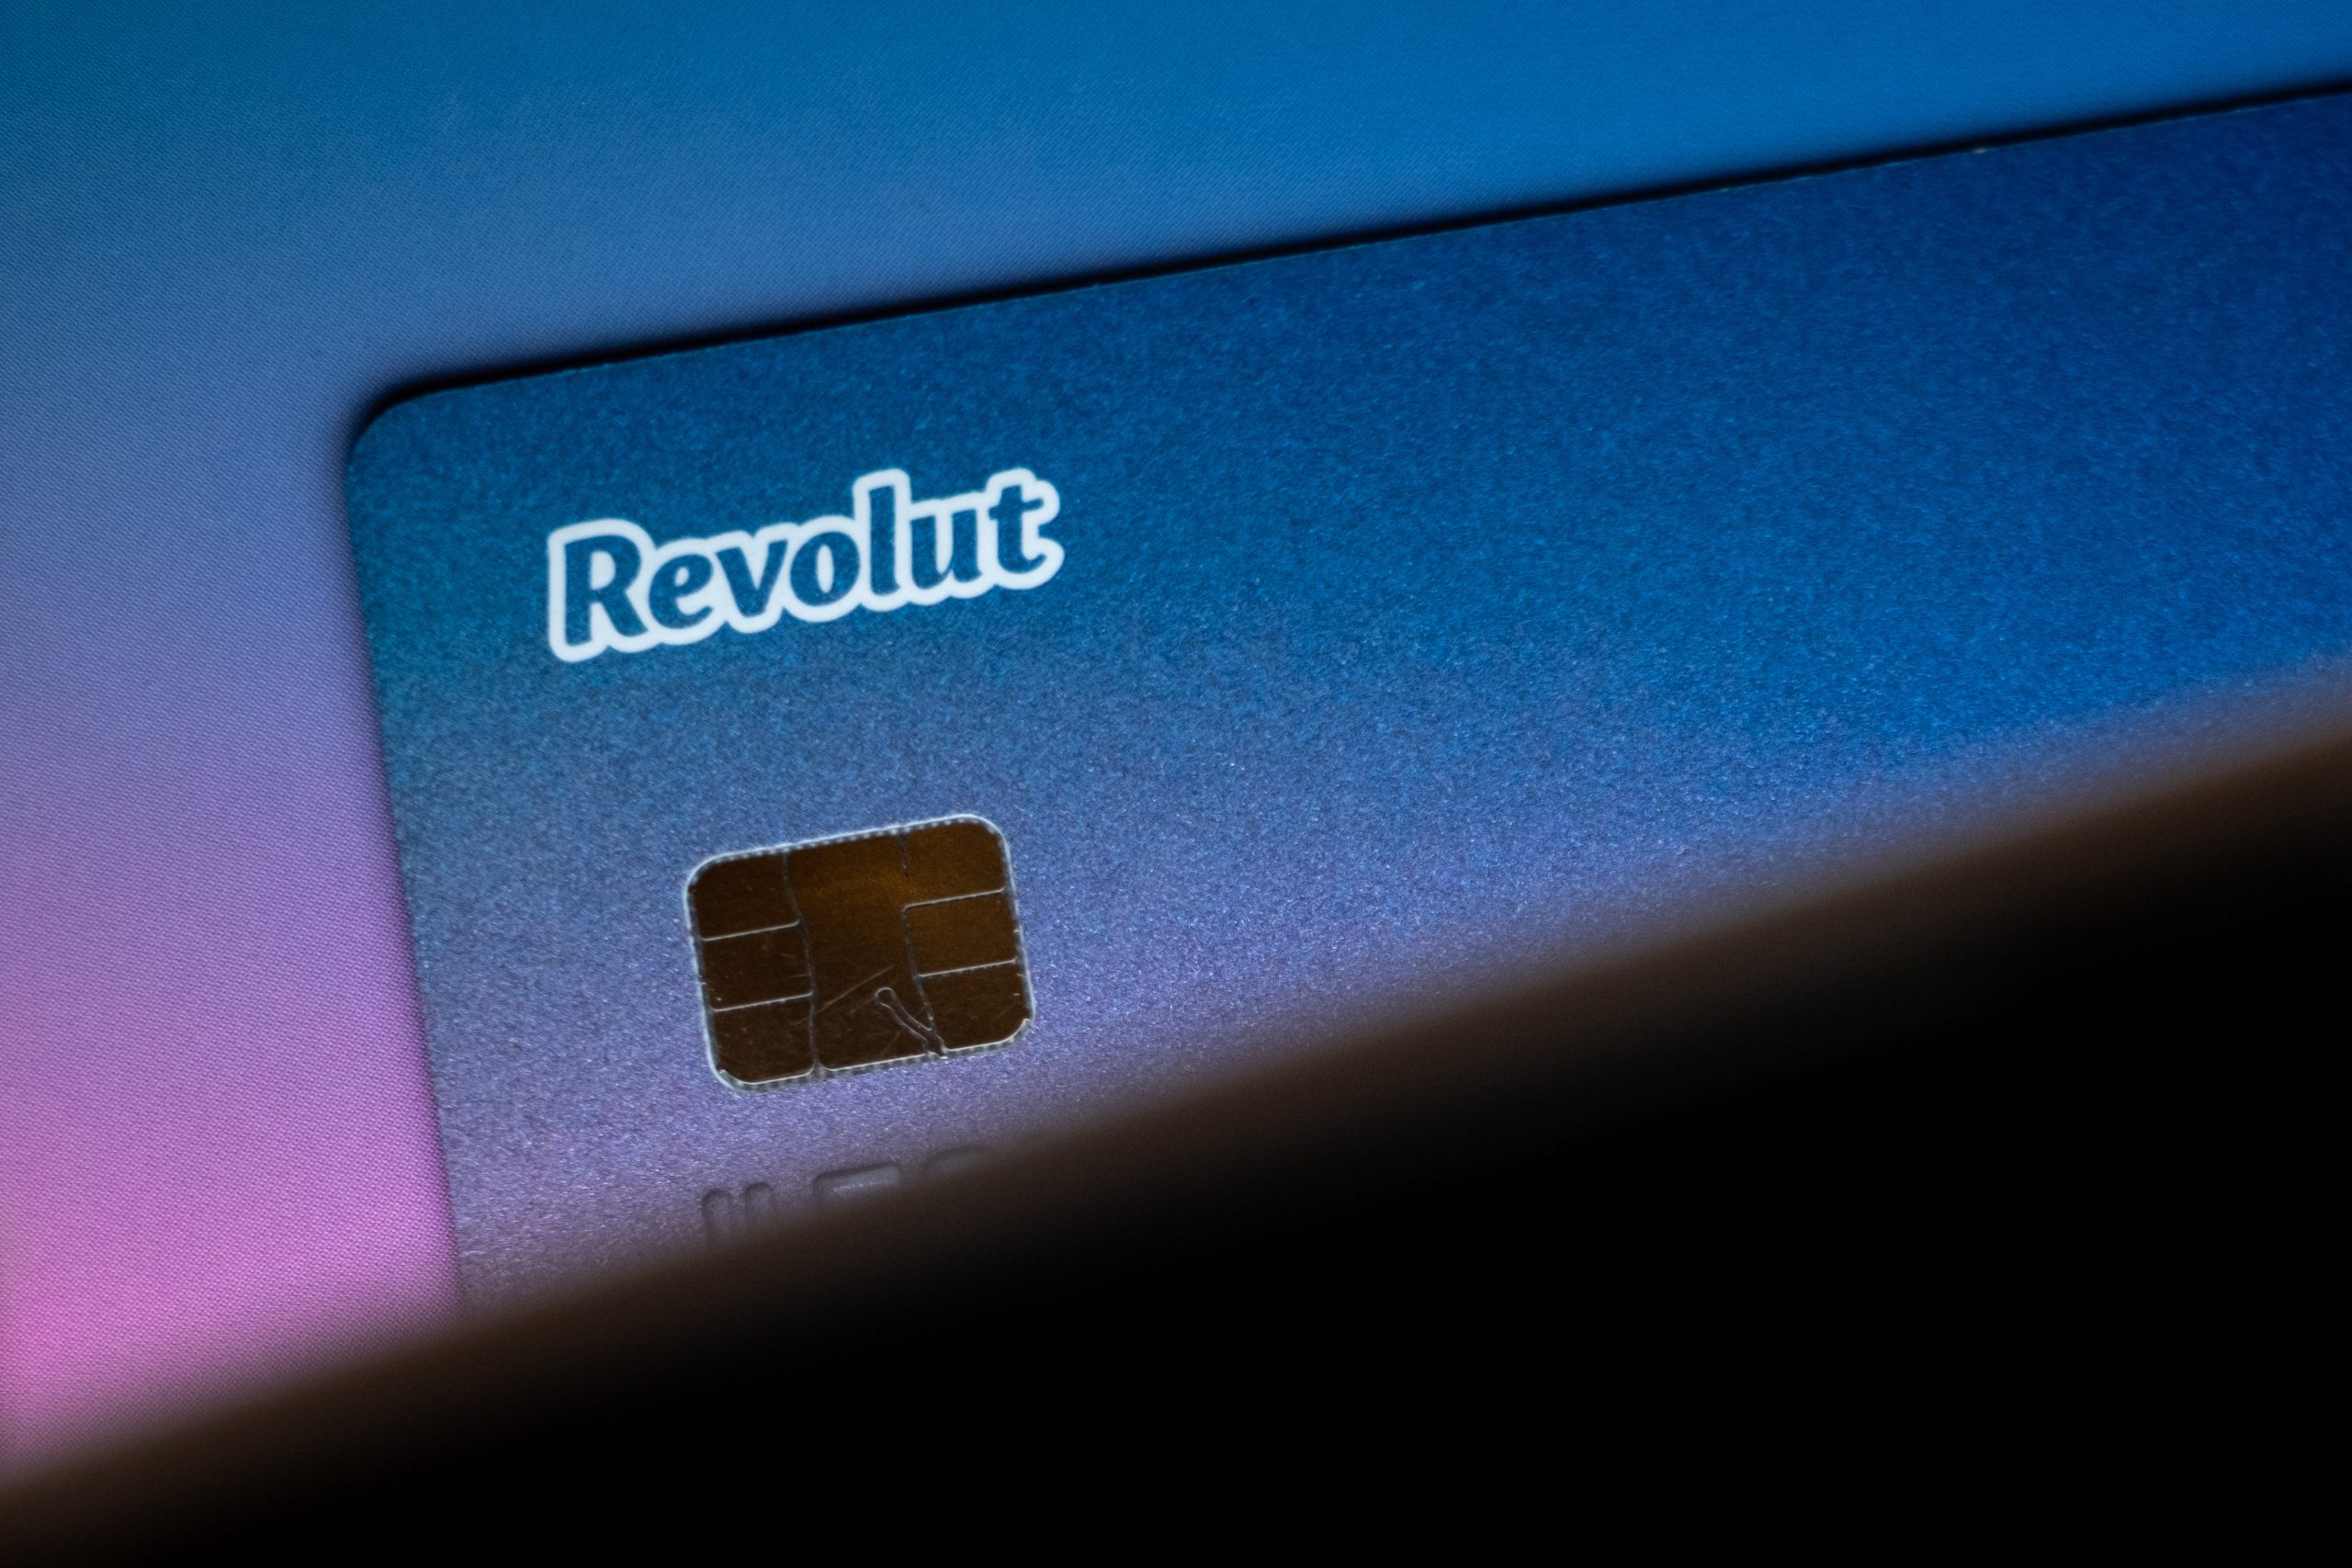 Revolut falls for 'social hack', data from 50,000 users on the street
